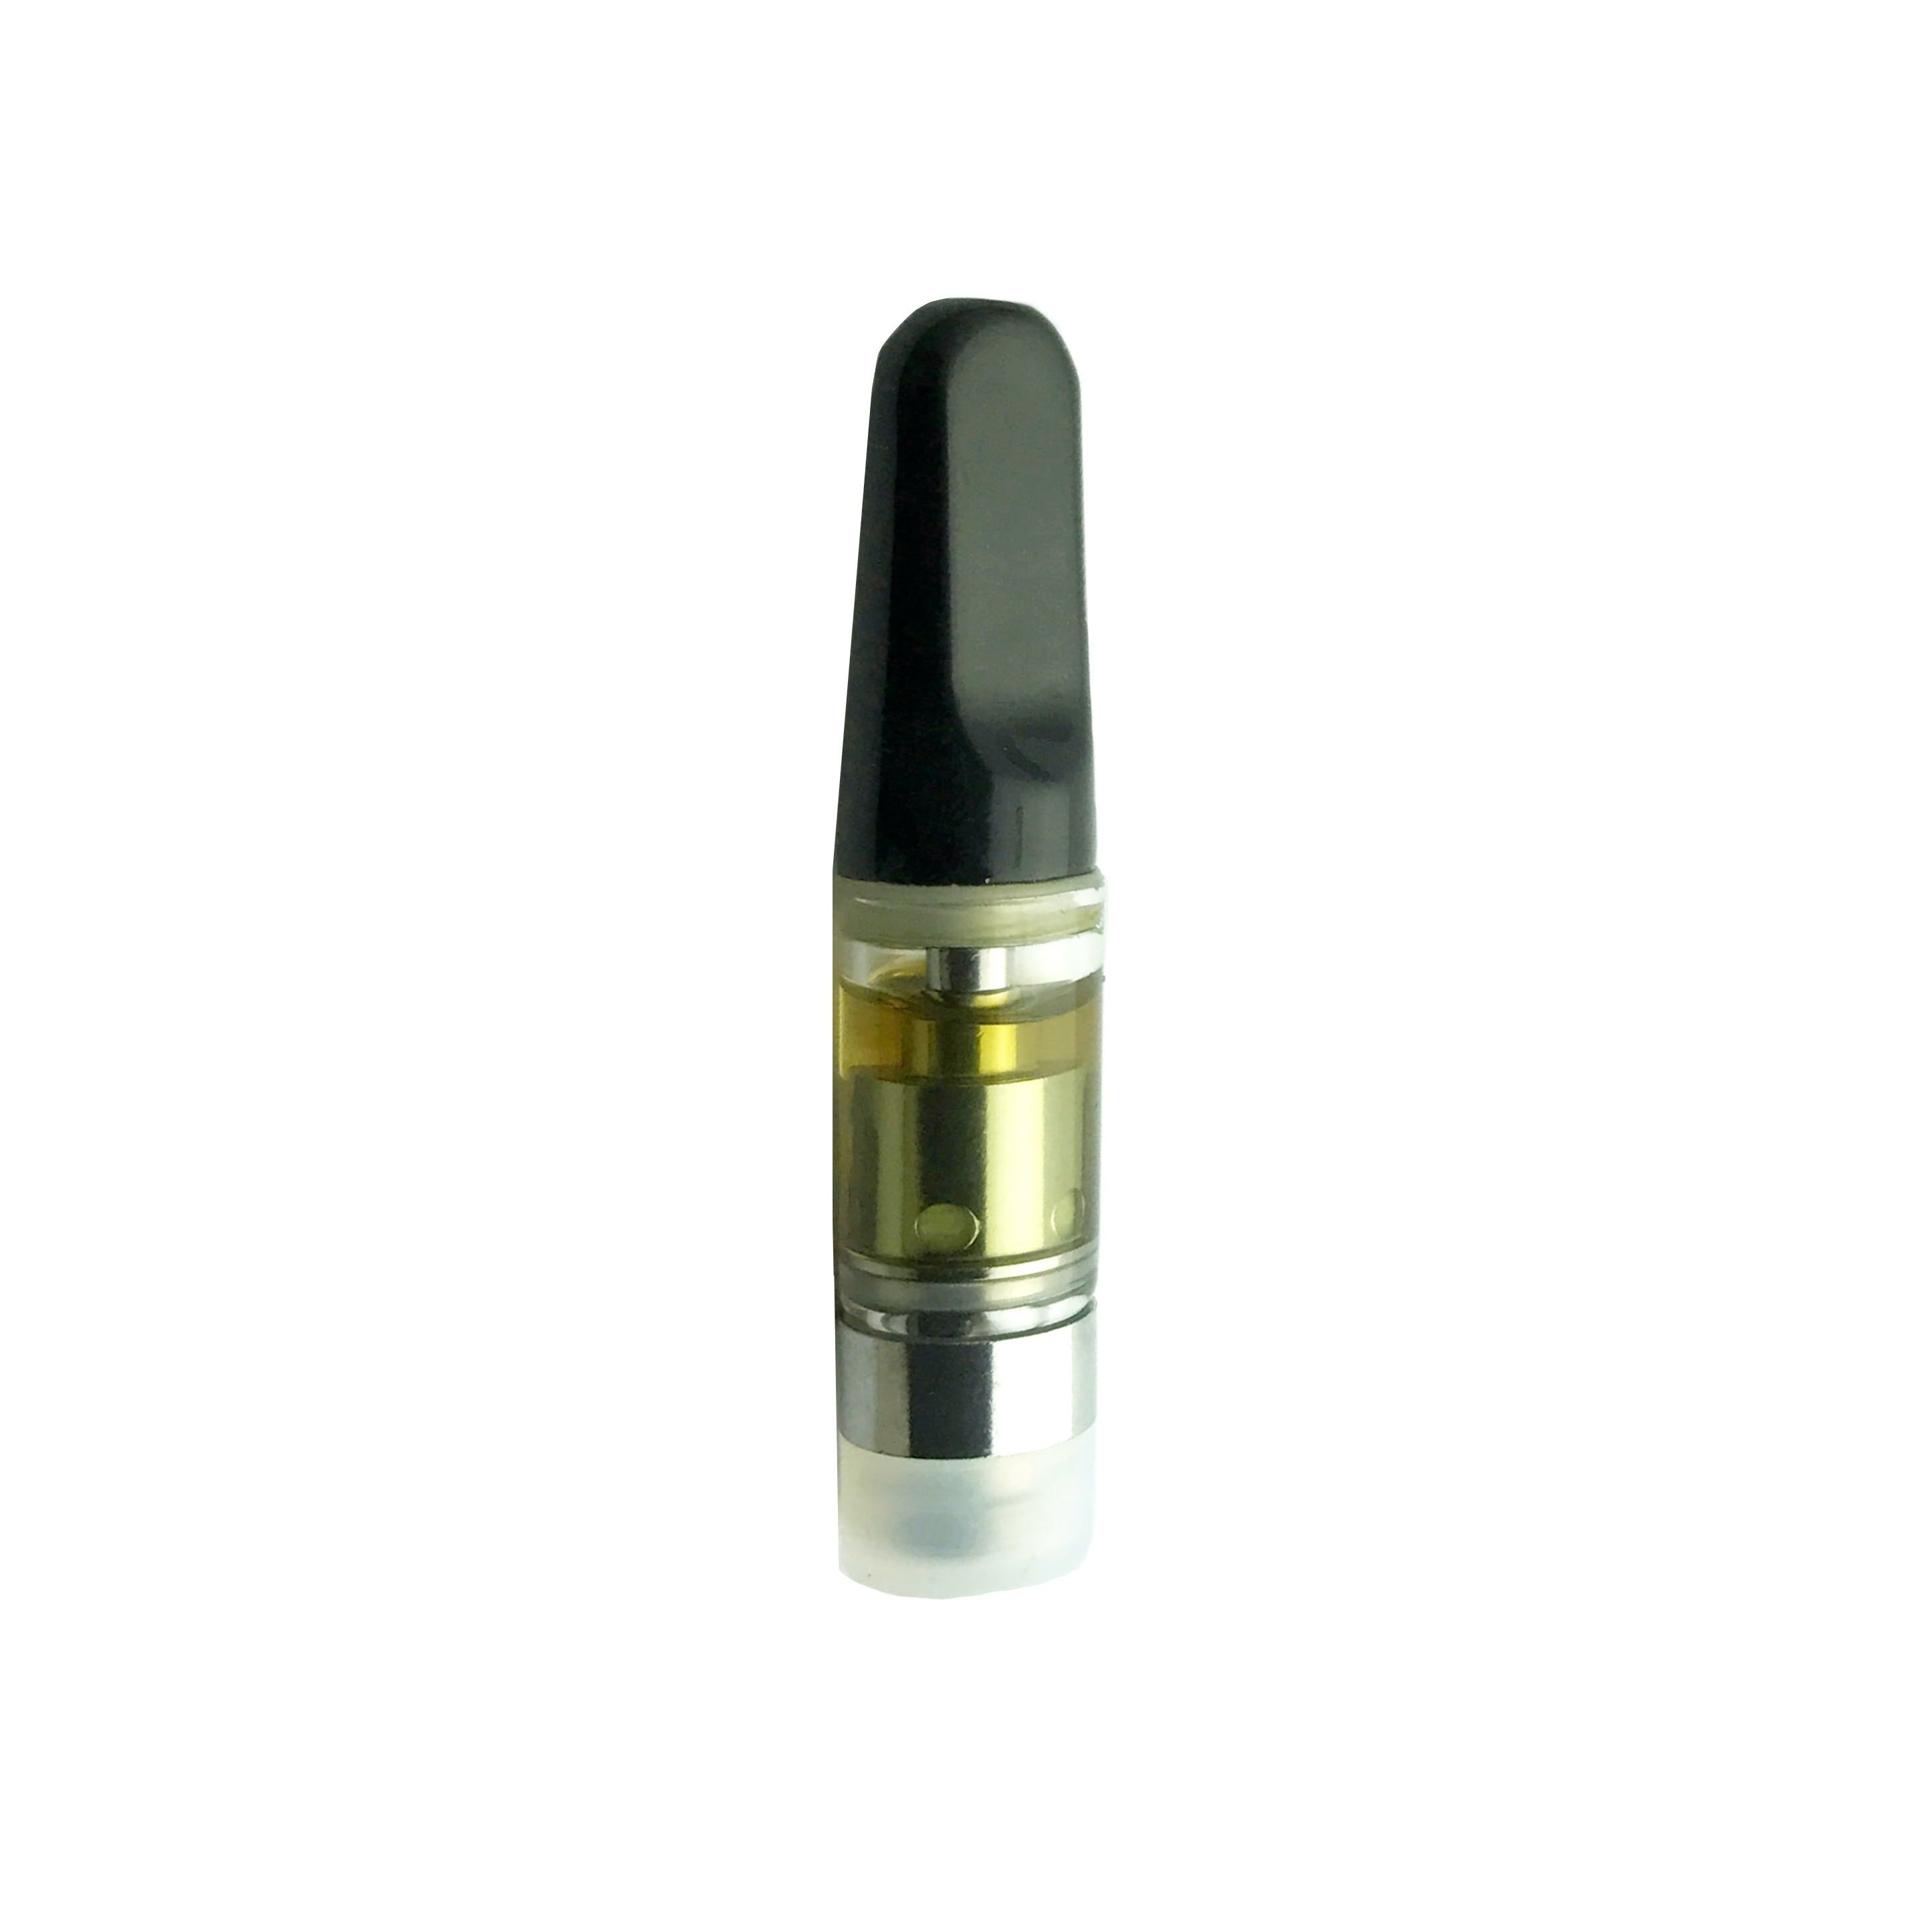 concentrate-blackberry-kush-12g-cartridge-from-mo-jave